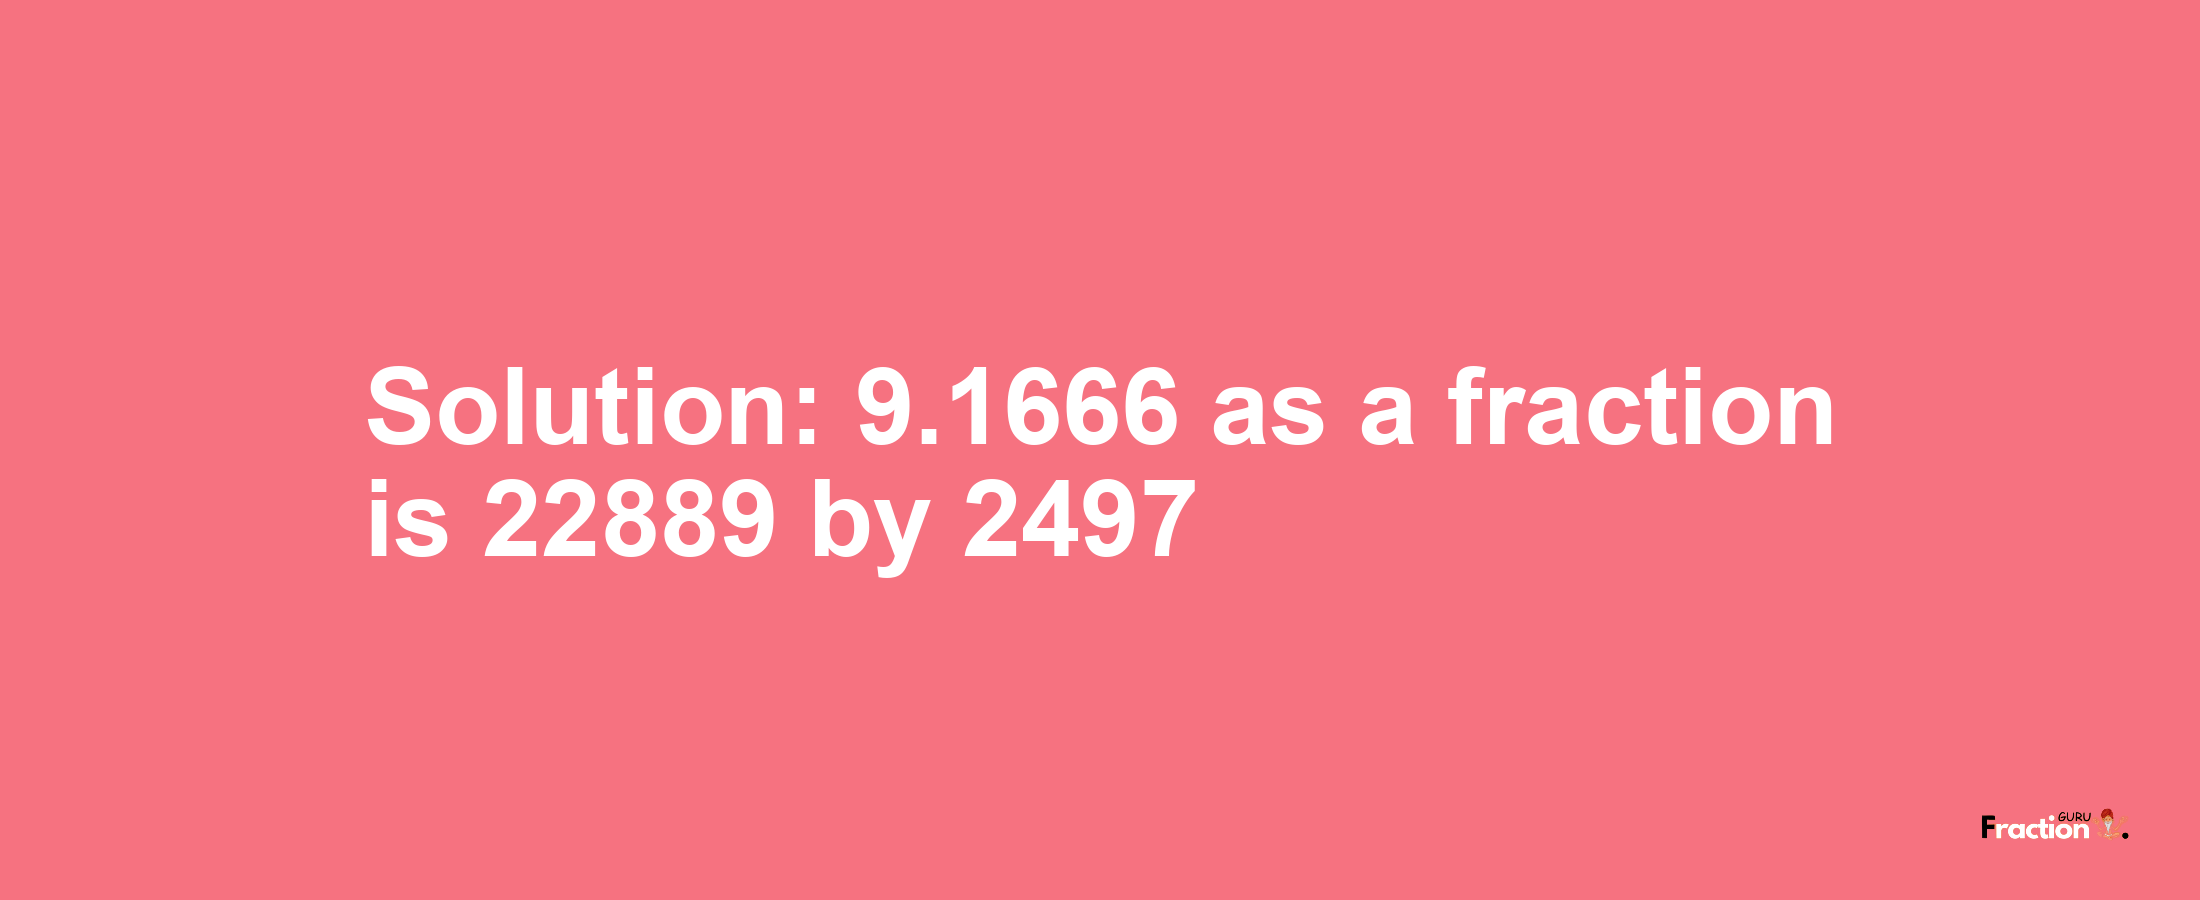 Solution:9.1666 as a fraction is 22889/2497